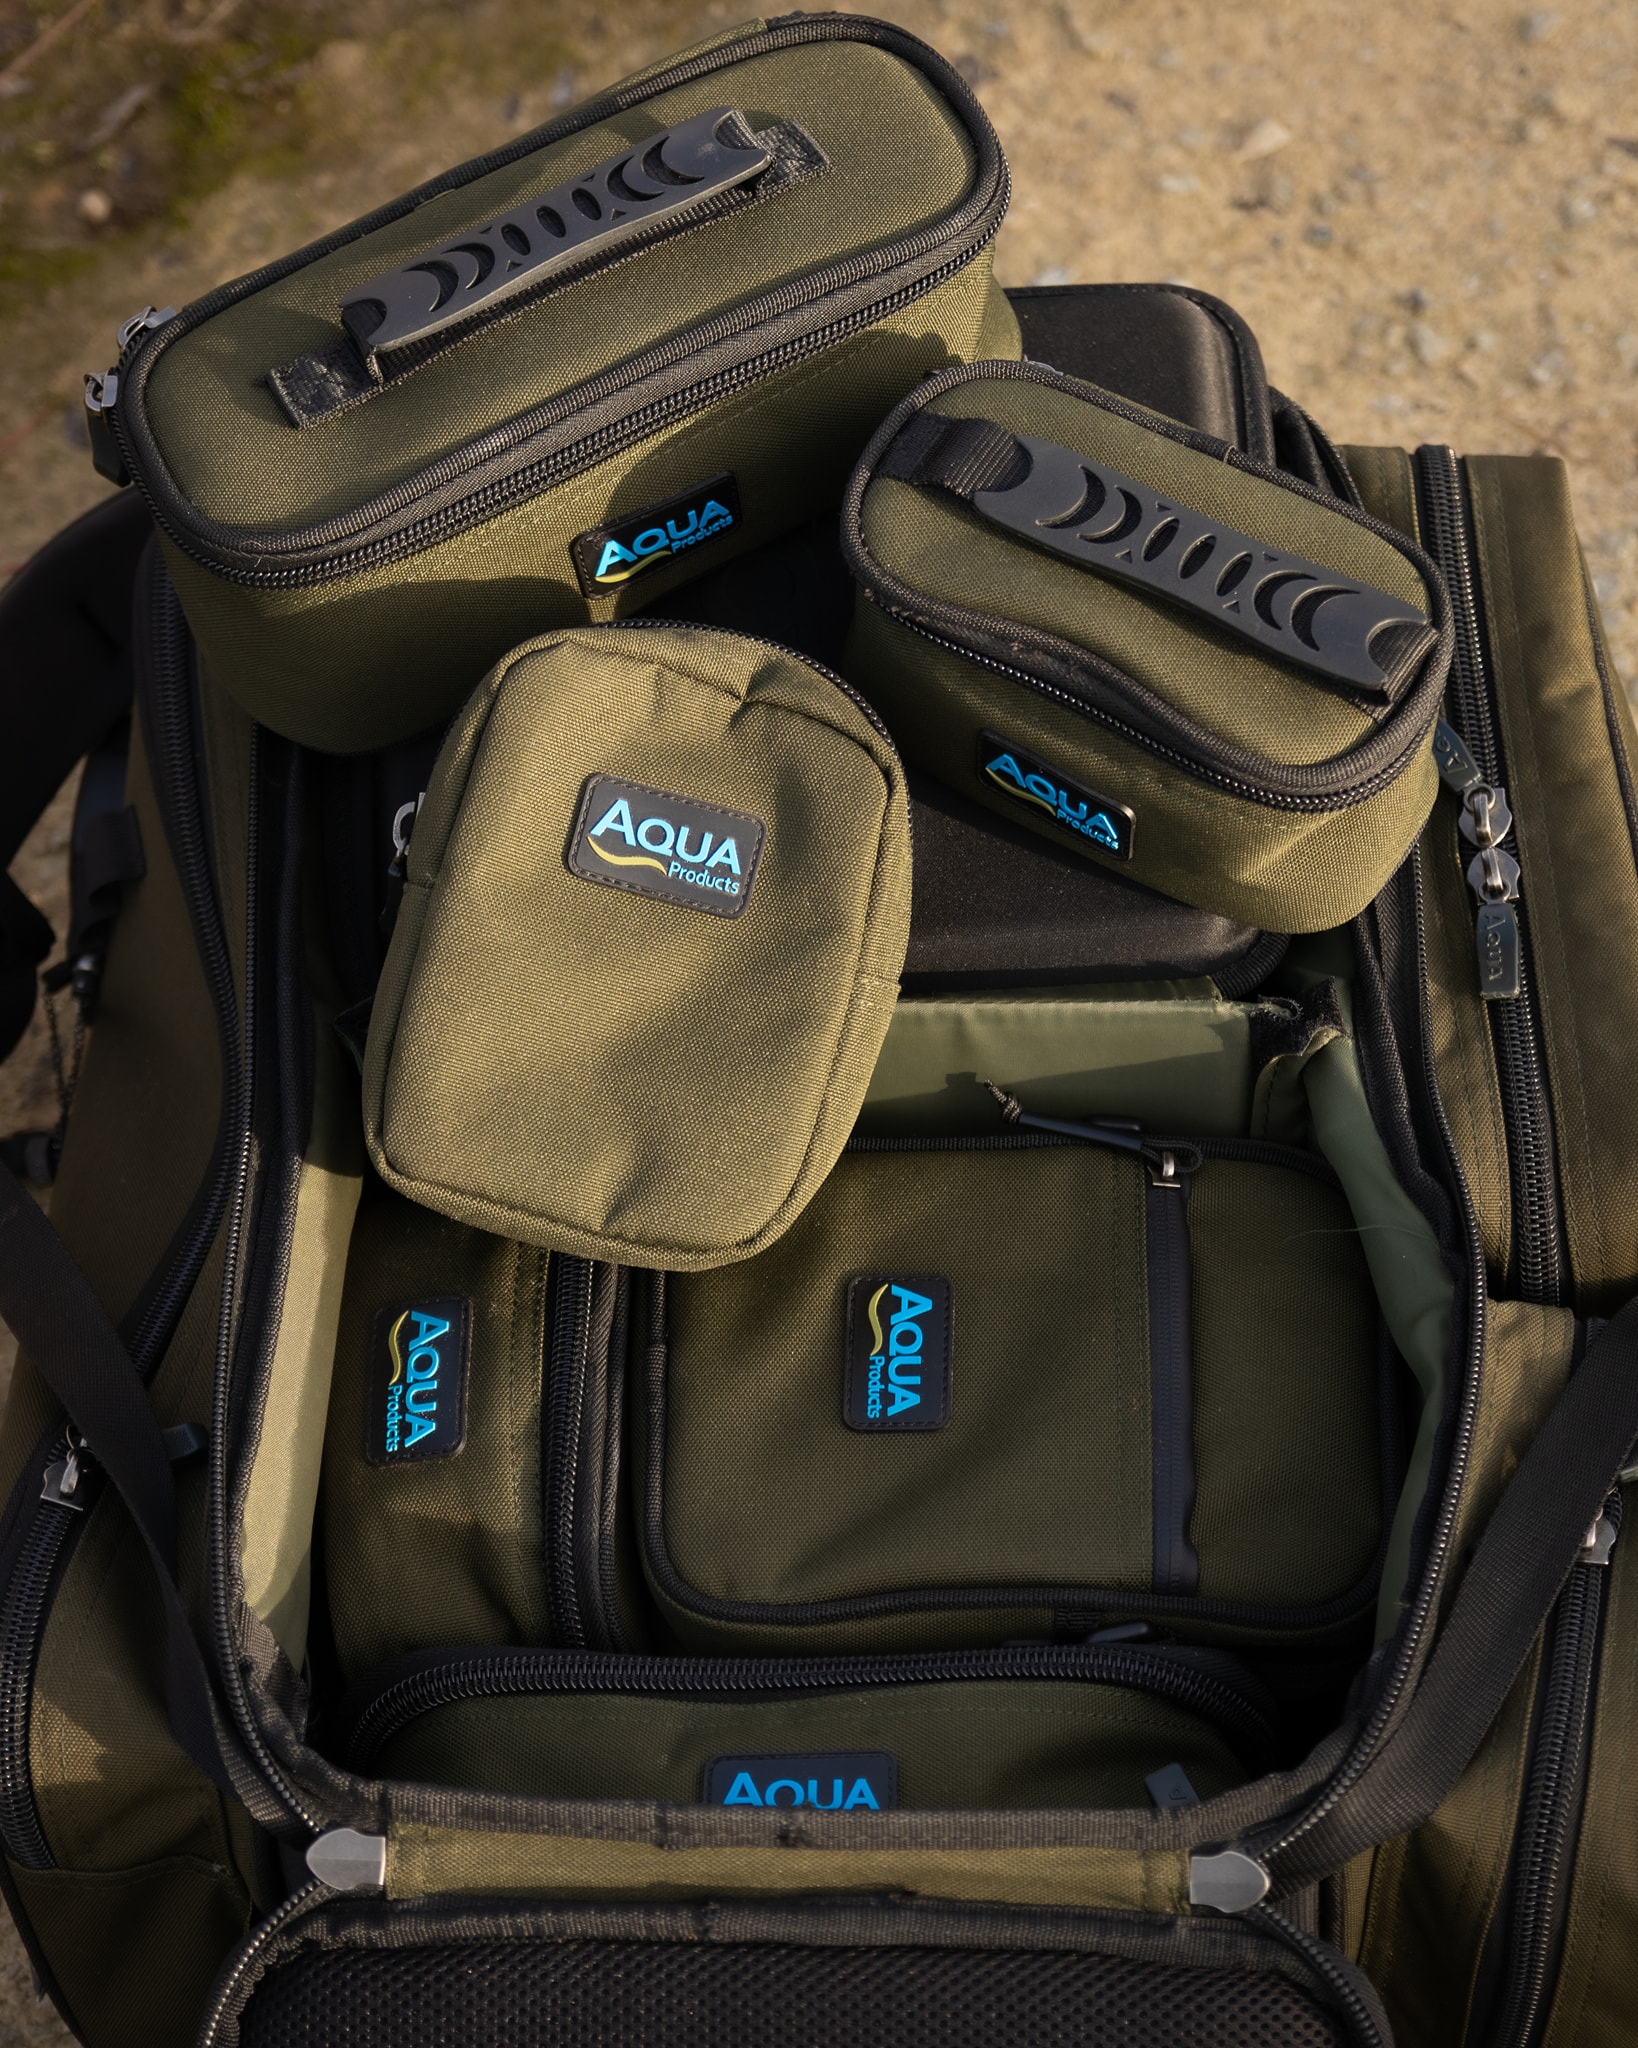 Aqua Products on X: The Roving Rucksack What's in yours? #AquaProducts  #GettingOutThere #PioneeringSpirit #BivvyLife #BrollyLife #Carp #CarpFishing  #Fishing #Angling #Karpe #Lifestyle #Nature #Photography #CarpPassion  #CarpFever #Carpe #Karp #Karpfen